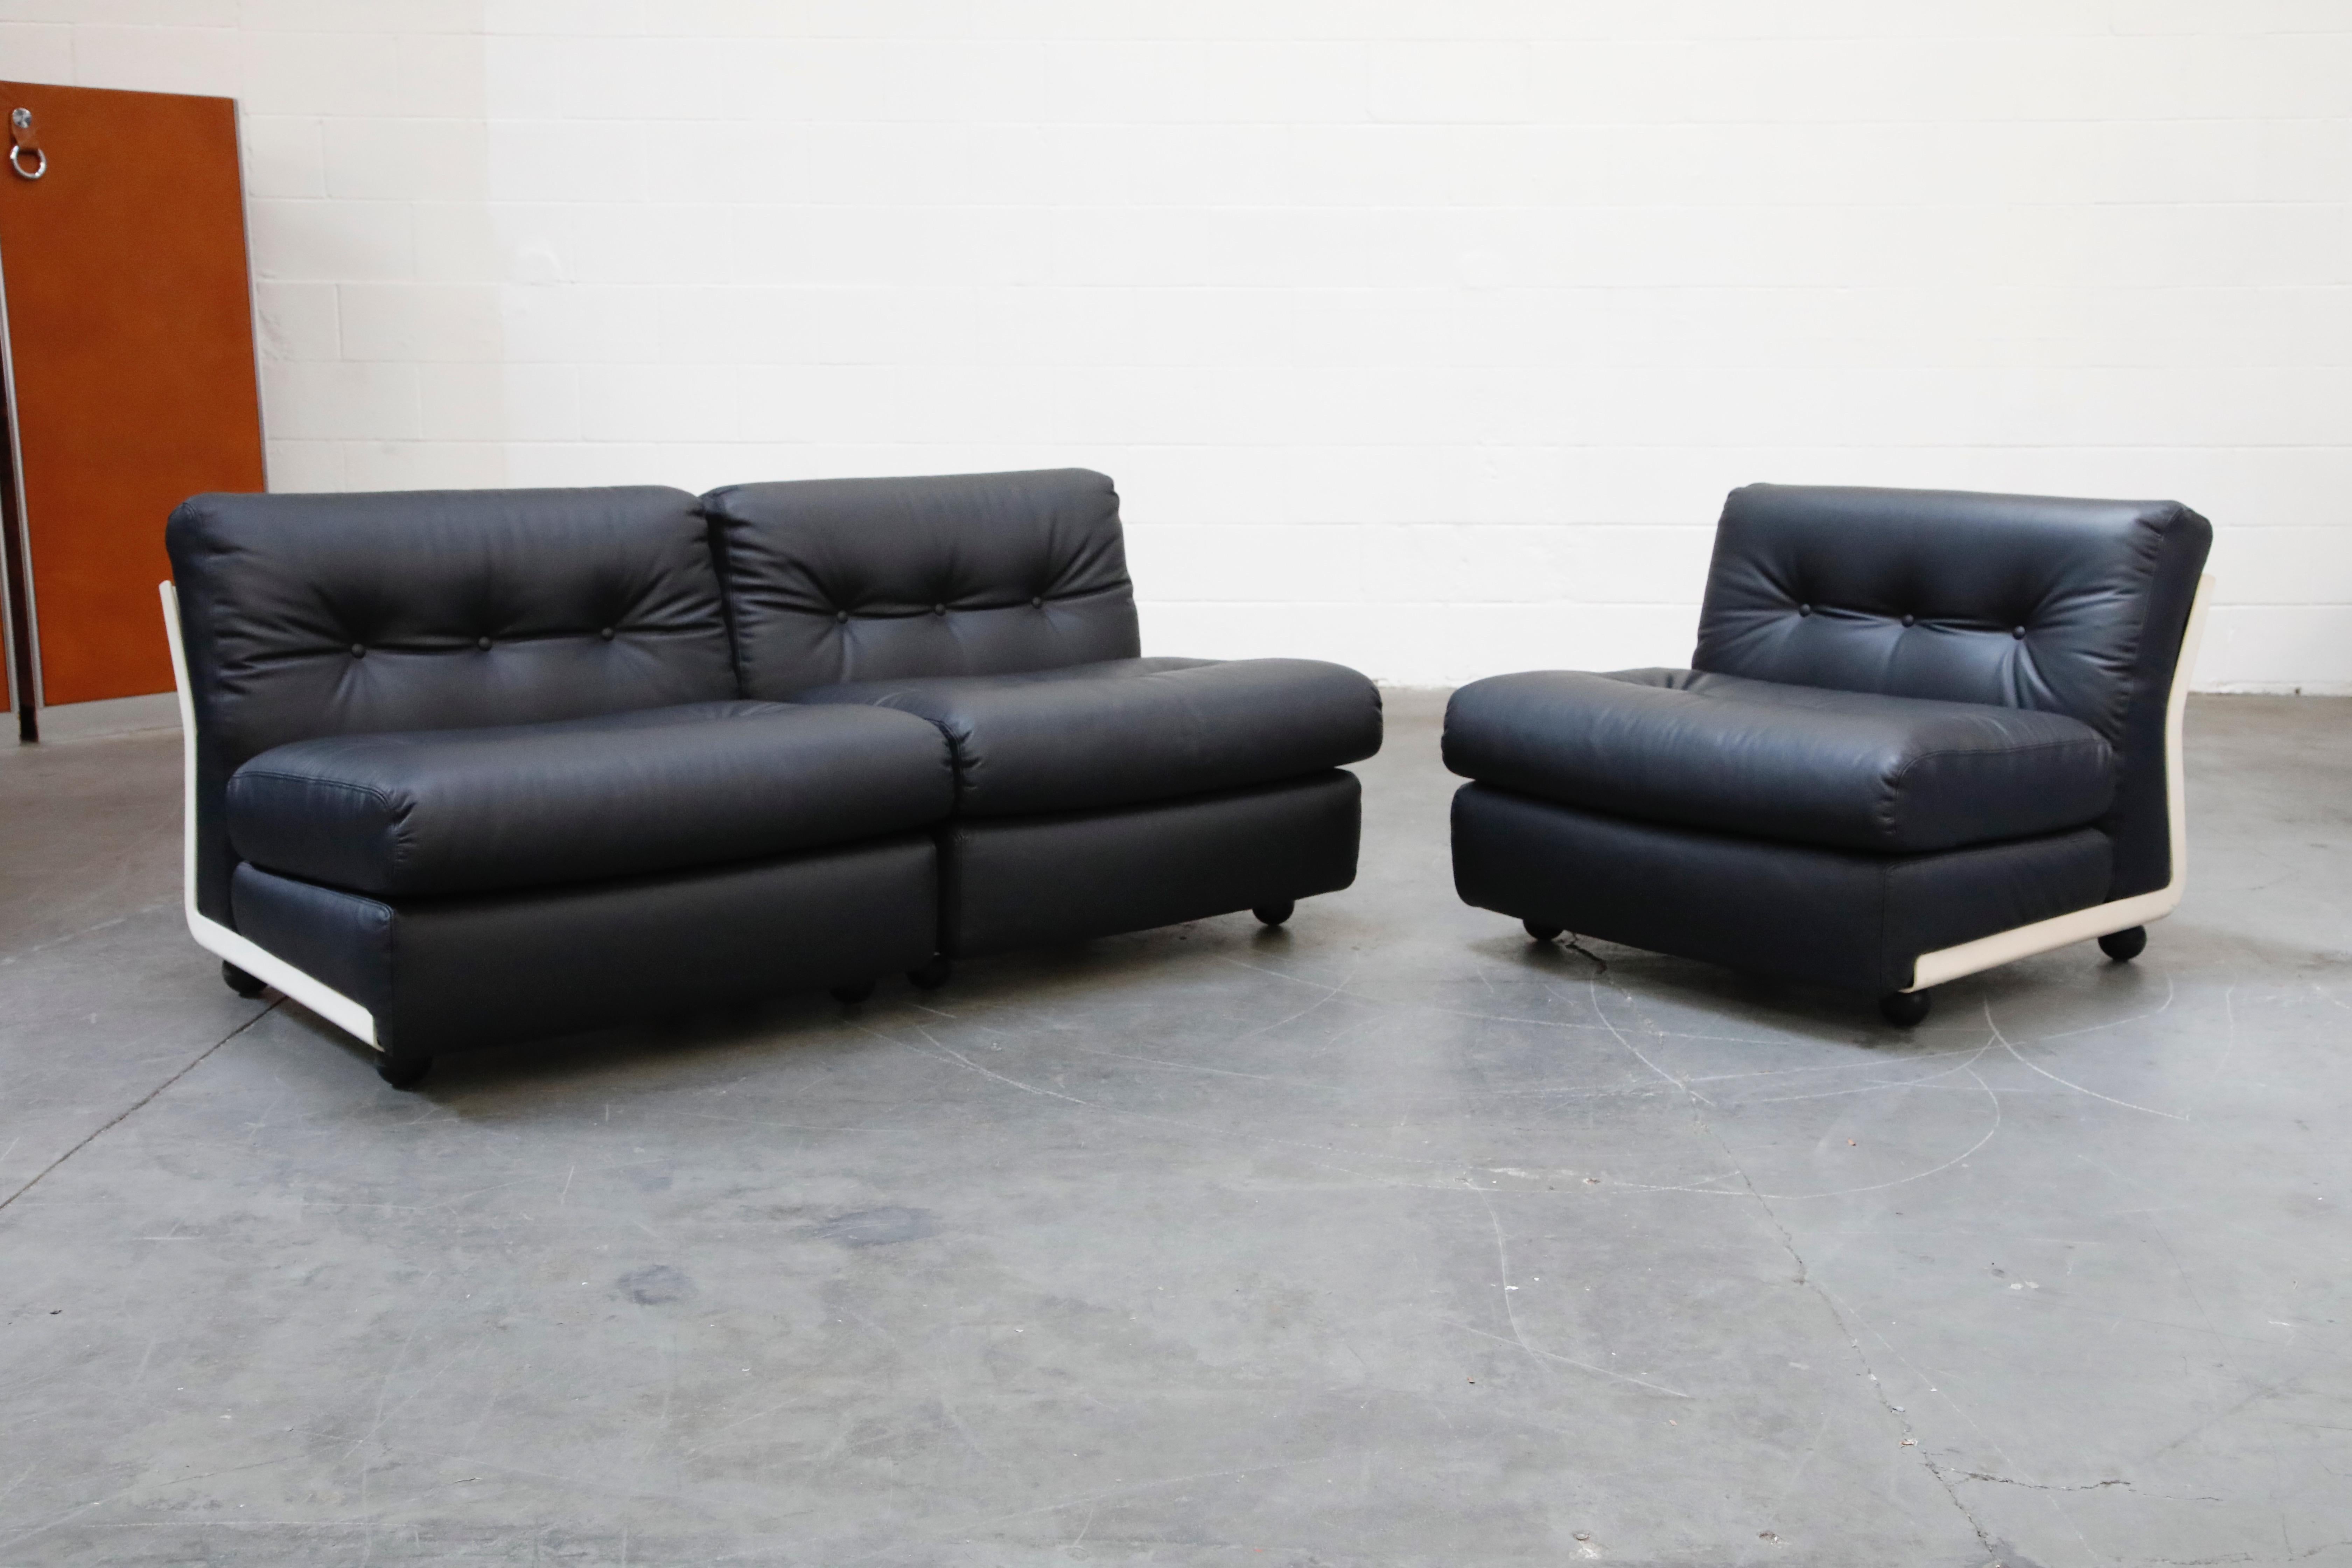 Leather 'Amanta' Sectional Lounges by Mario Bellini for C&B Italia, circa 1966, Signed